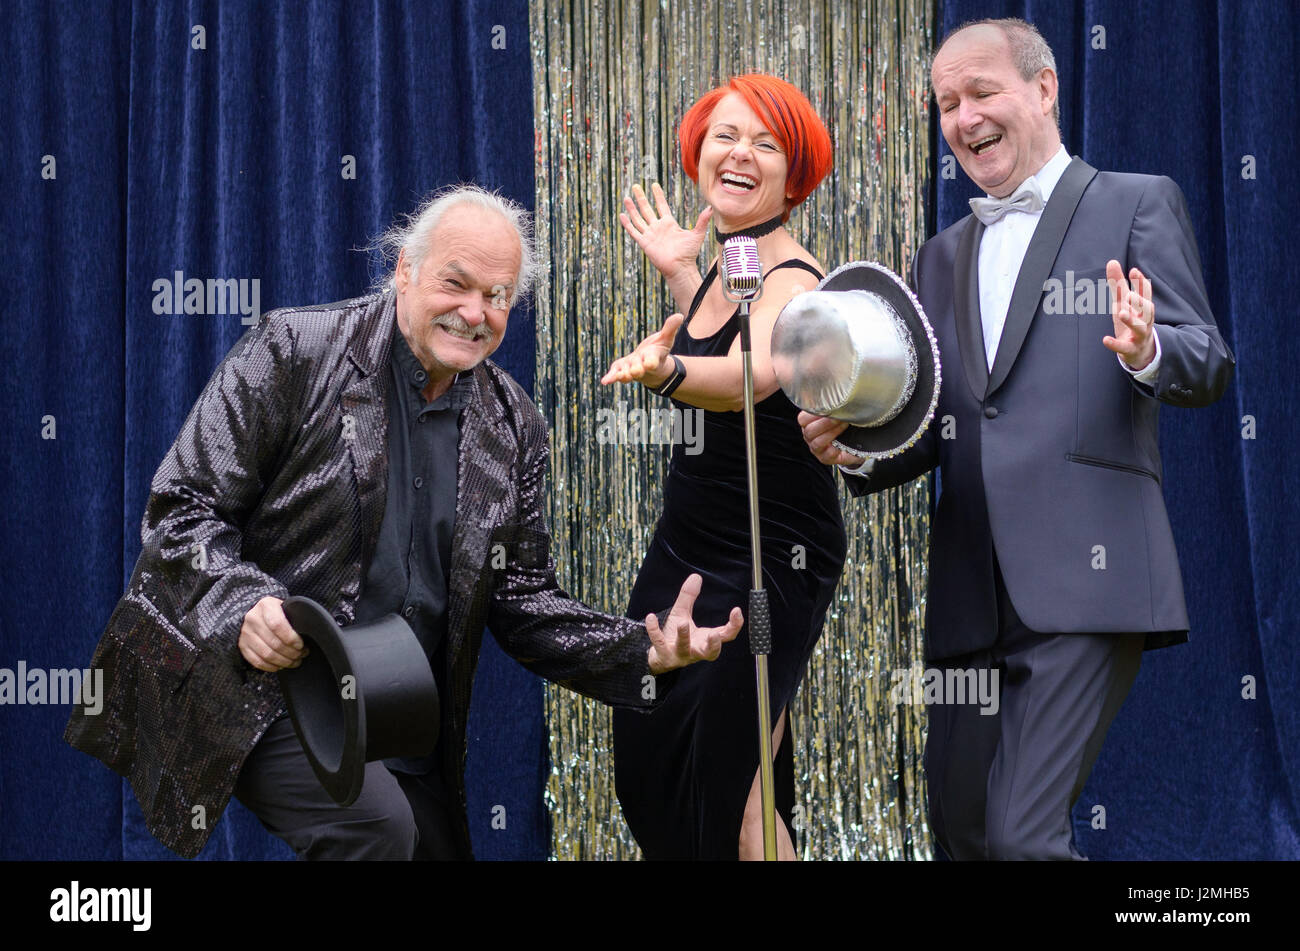 Three lively performers on stage celebrating in front of a microphone with a vivacious redhead woman and two gentlemen with top hats laughing and joki Stock Photo